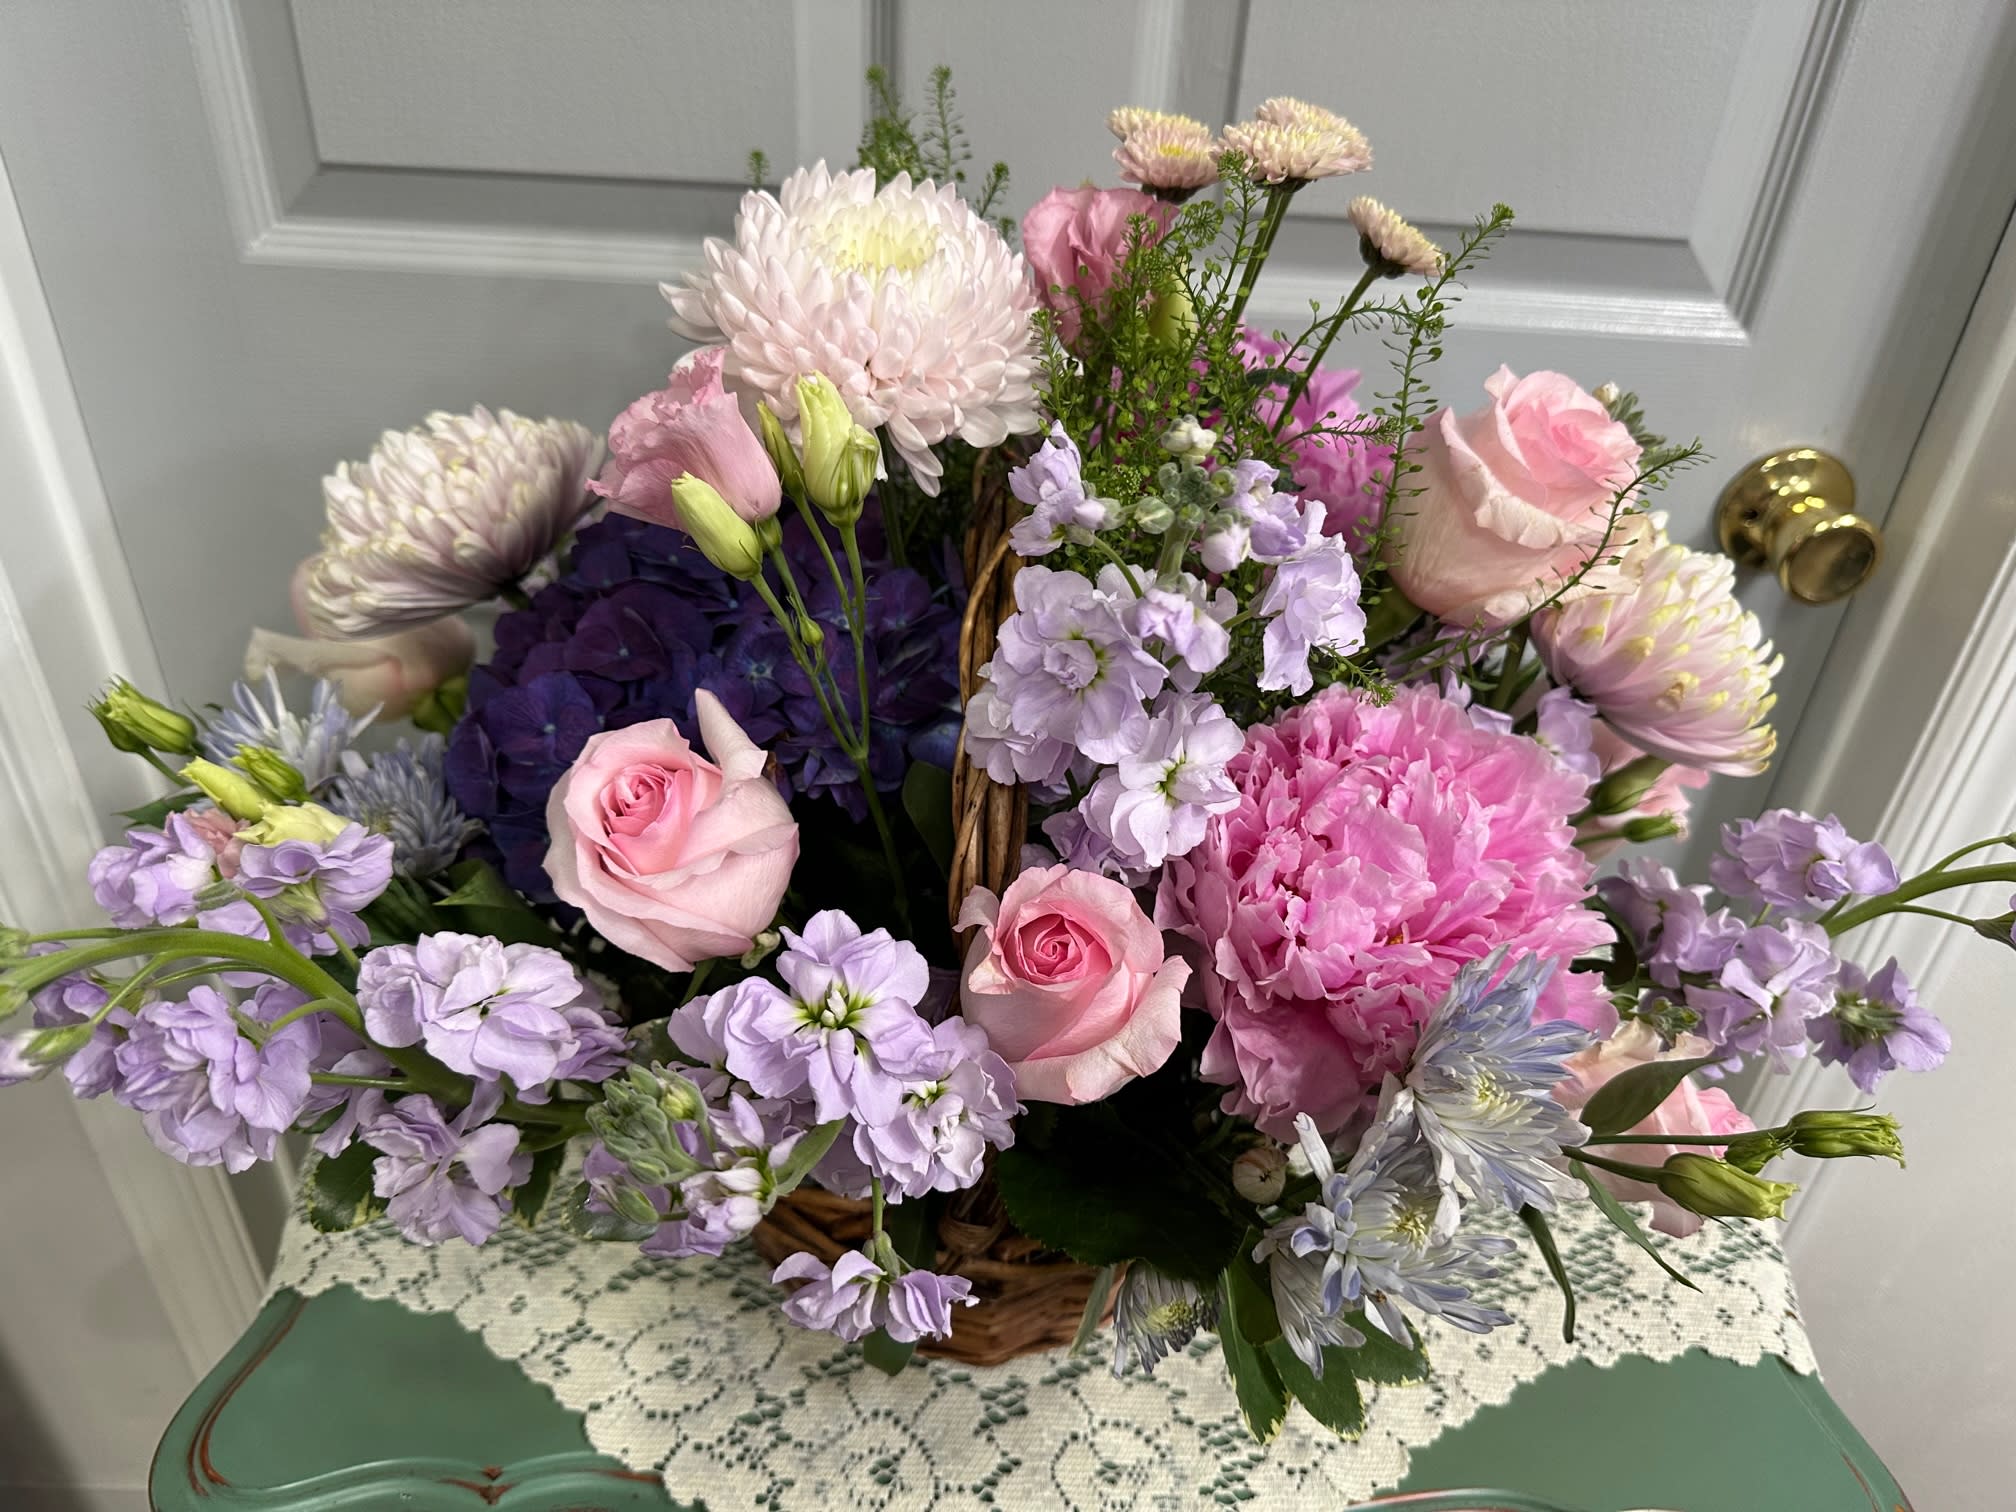 Garden of Colors - Assorted colors of roses, Peonies(Seasonal),Hydrangea, Stock, Lisianthus,  Seasonal Flowers,  Touch of Fancy Greens. Some Flowers  if not available may have to be substituted.